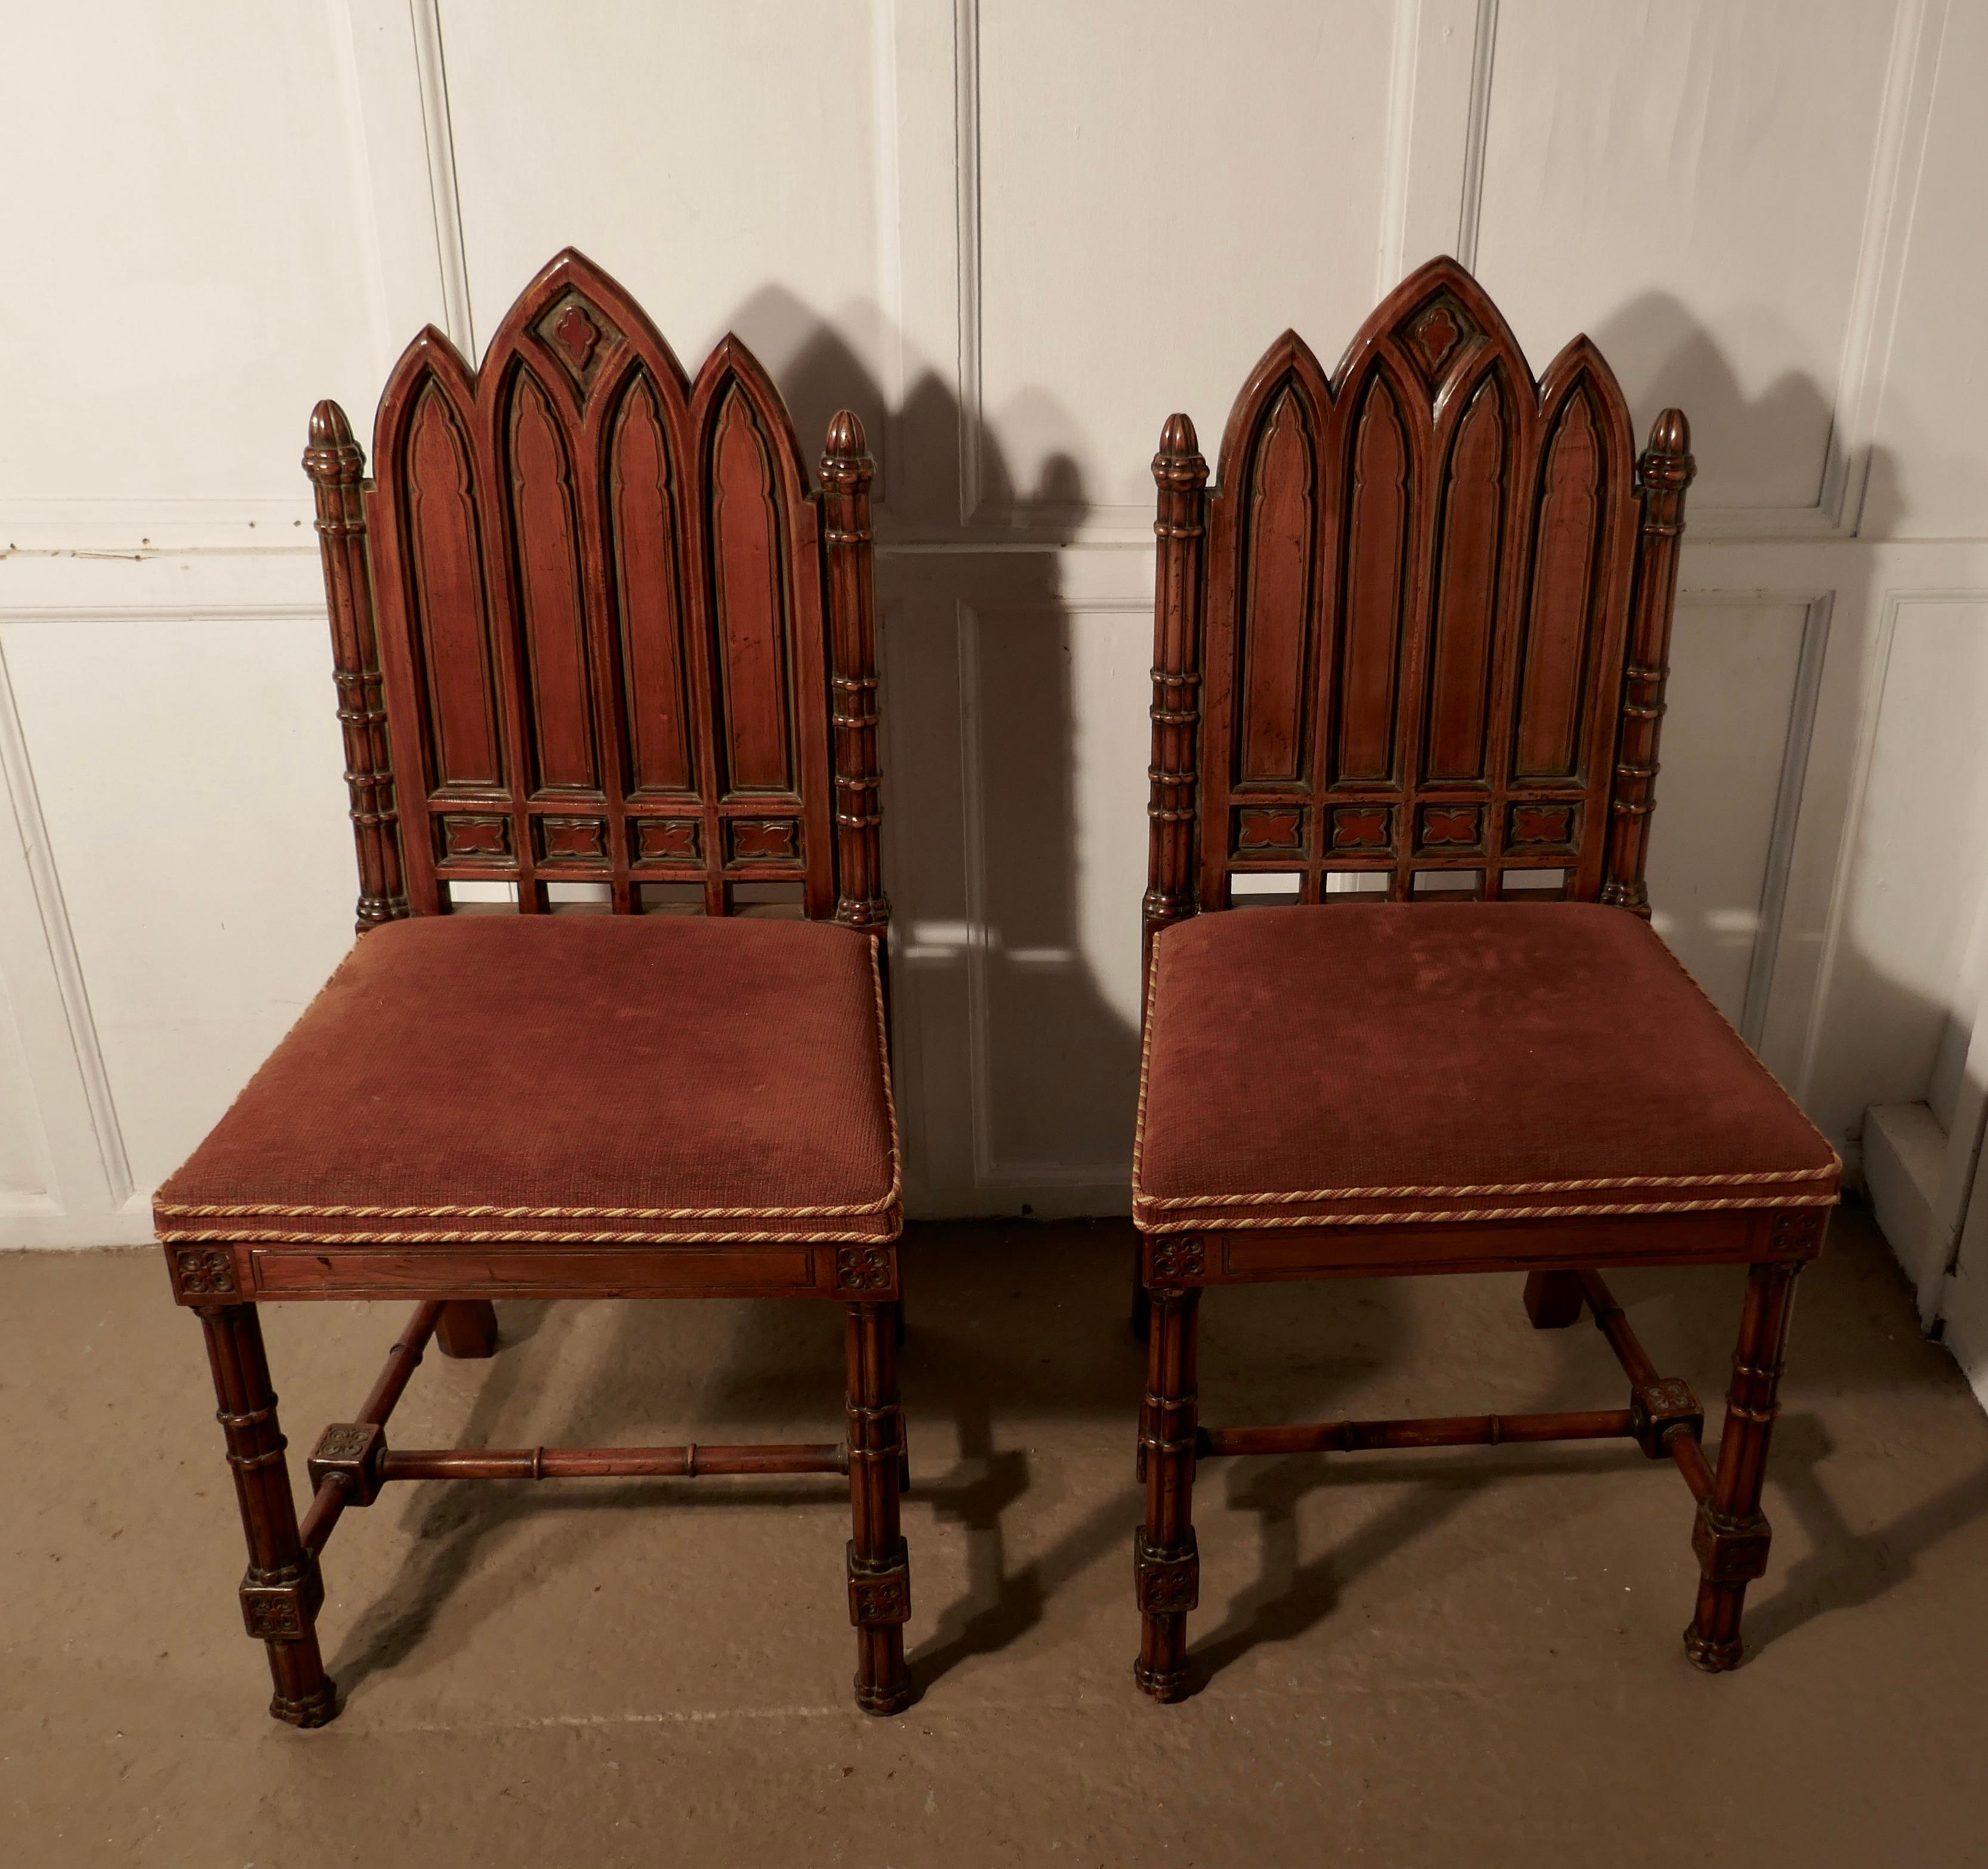 A pair of Pugin style Arts & Crafts carved oak hall chairs

This is a good quality and attractively carved pair of chairs, the chairs are carved in the Pugin style with a row of Gothic columns forming the backrest
The chairs have sturdy turned,